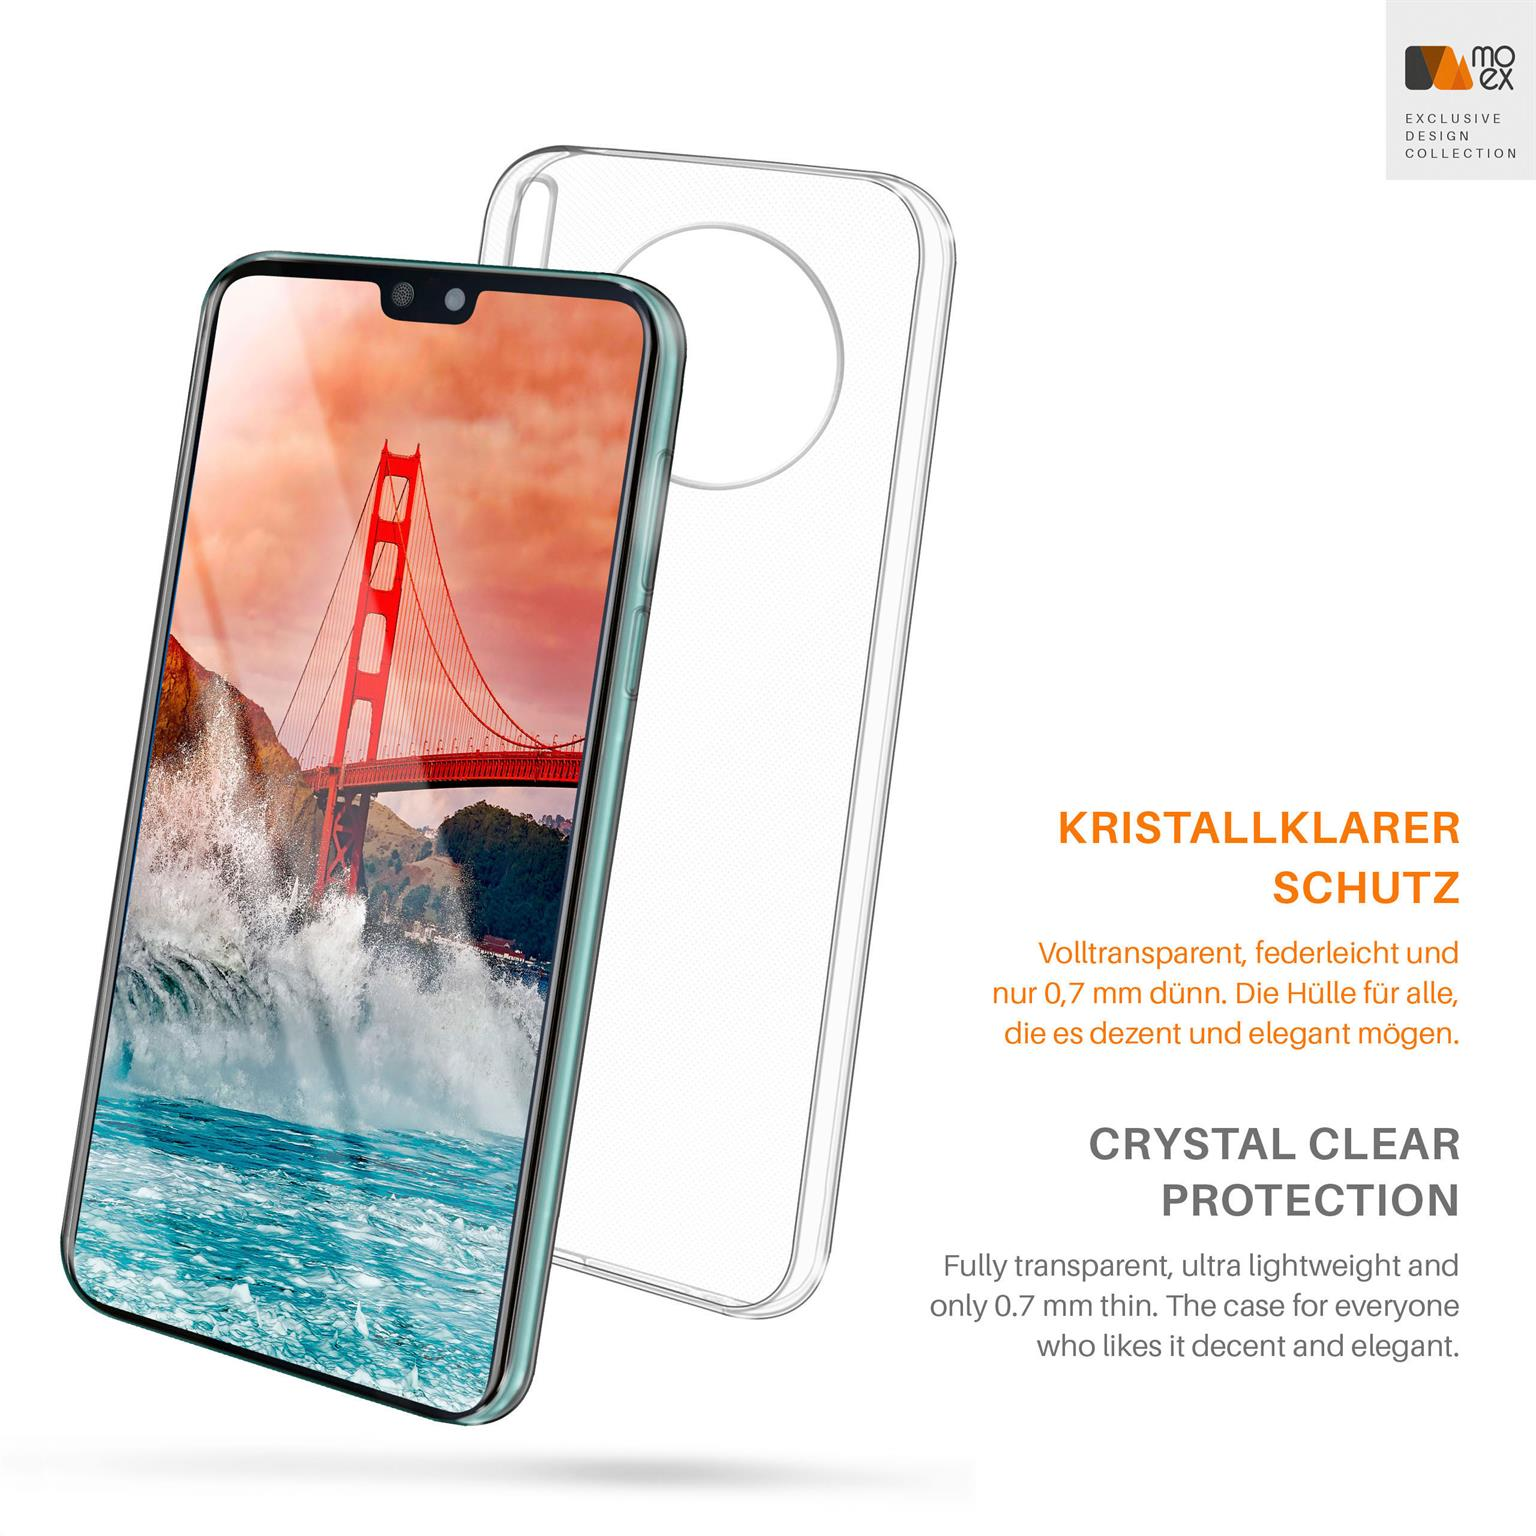 Case, Backcover, MOEX Aero Huawei, Crystal-Clear 30, Mate